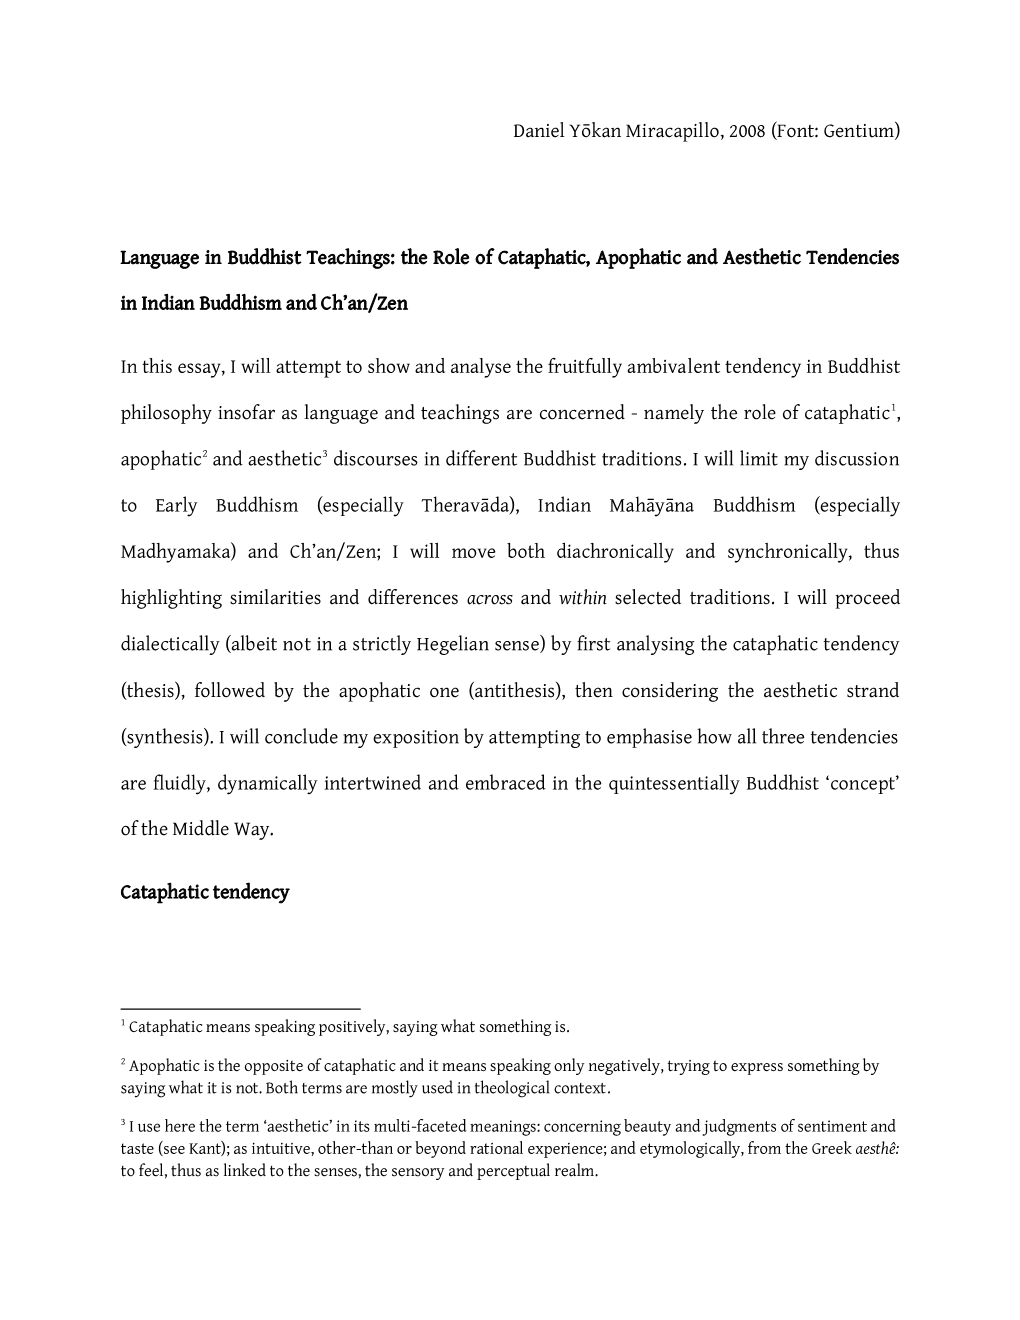 Language in Buddhist Teachings: the Role of Cataphatic, Apophatic and Aesthetic Tendencies in Indian Buddhism and Ch’An/Zen